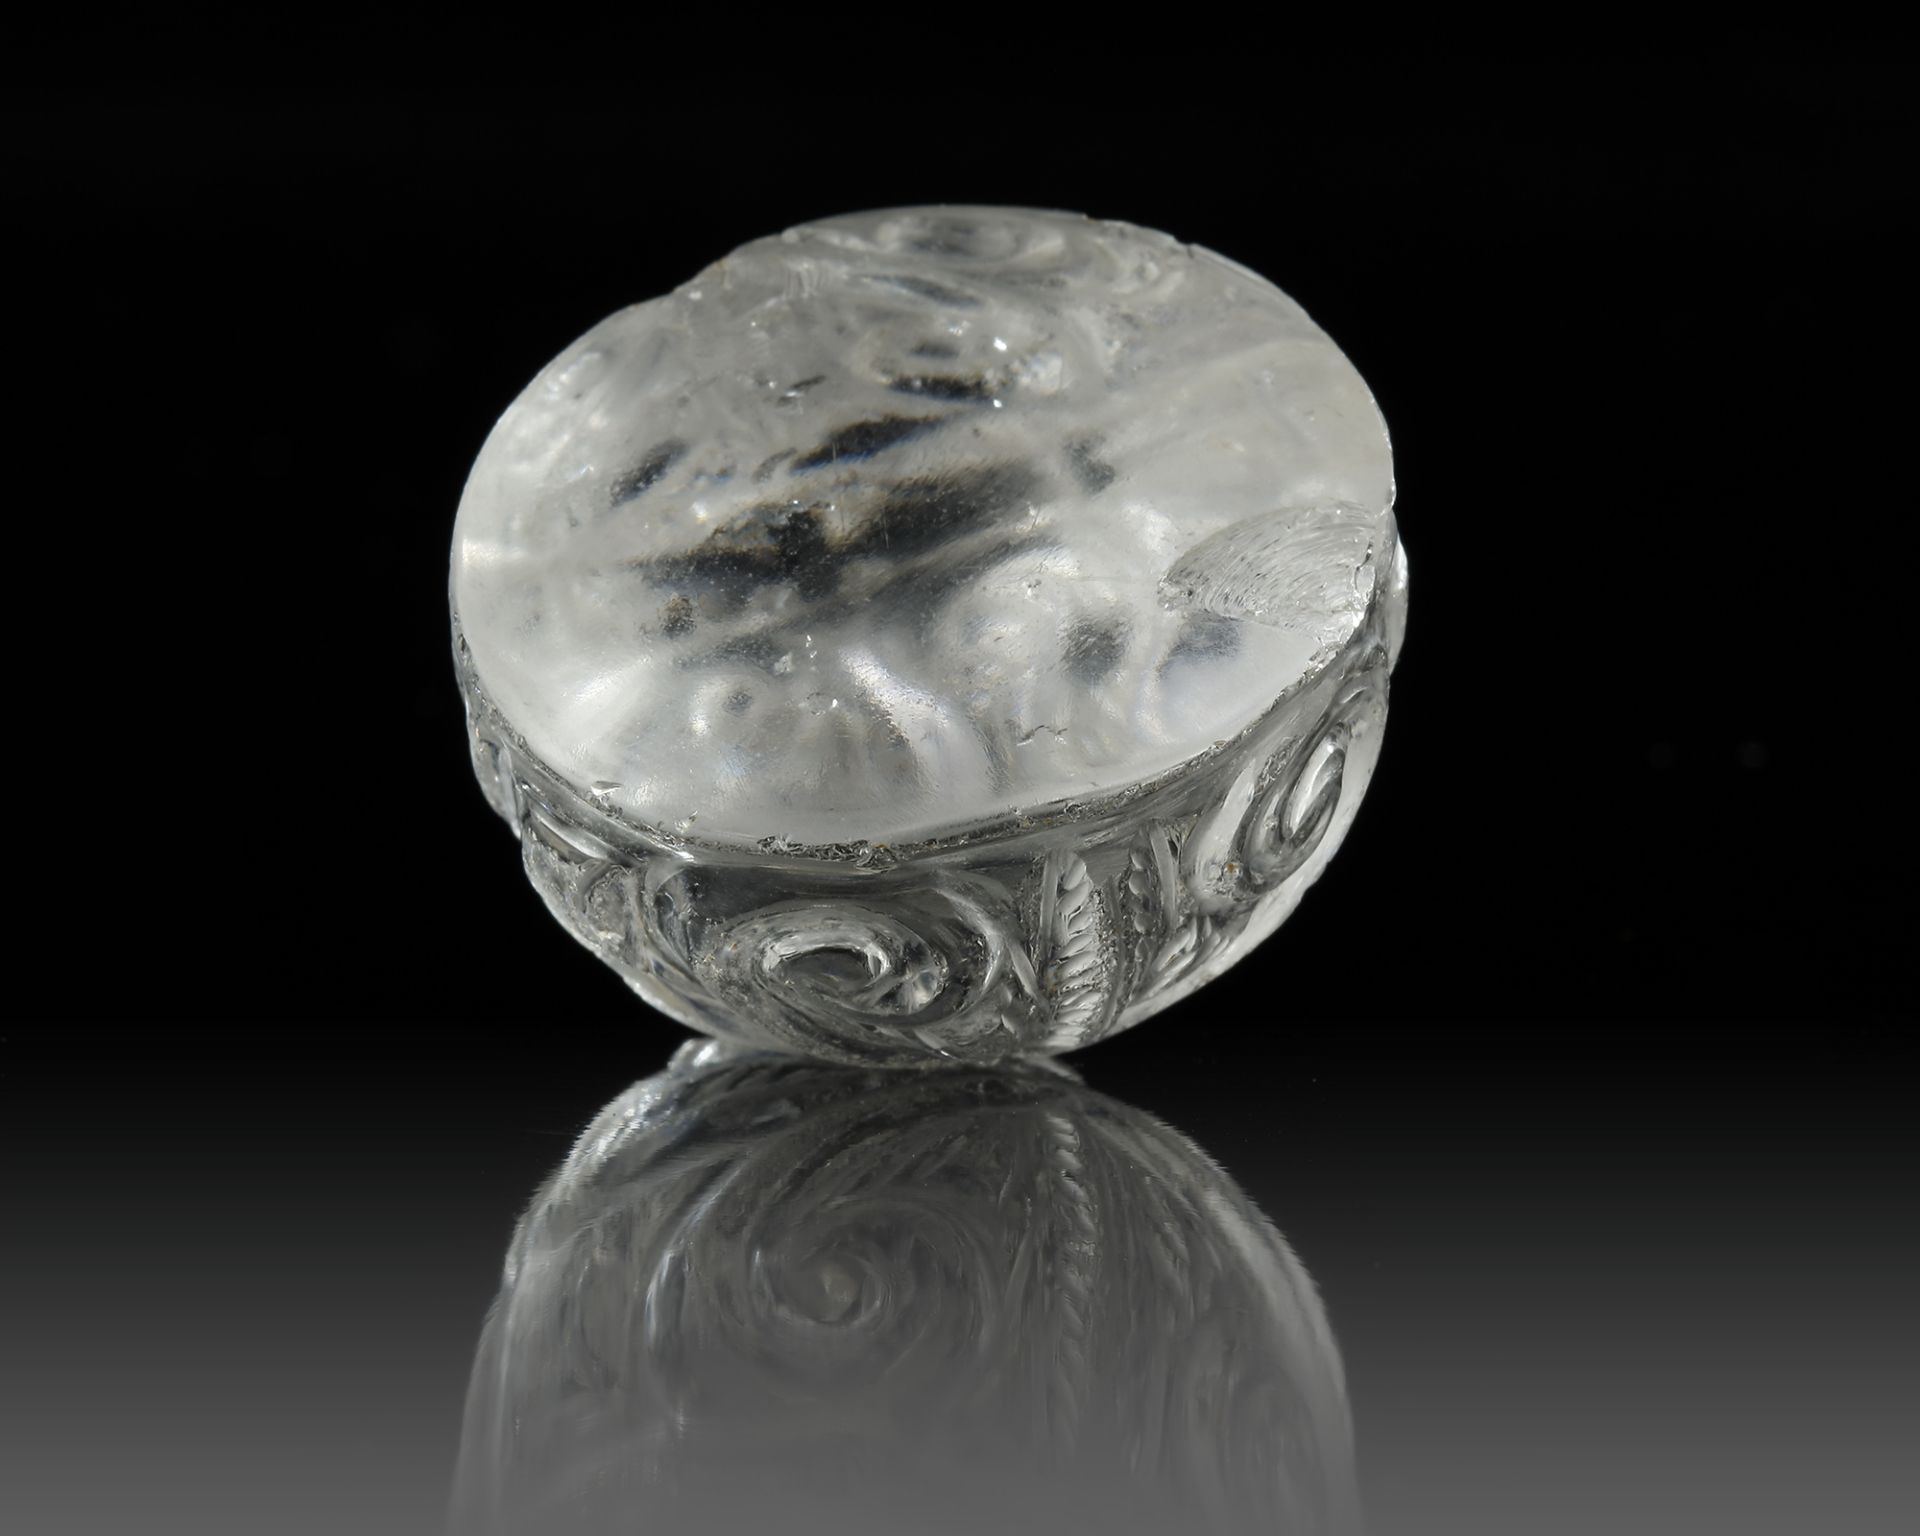 A FATIMID ROCK CRYSTAL CHESS PIECE, EGYPT, 11TH CENTURY - Image 5 of 6